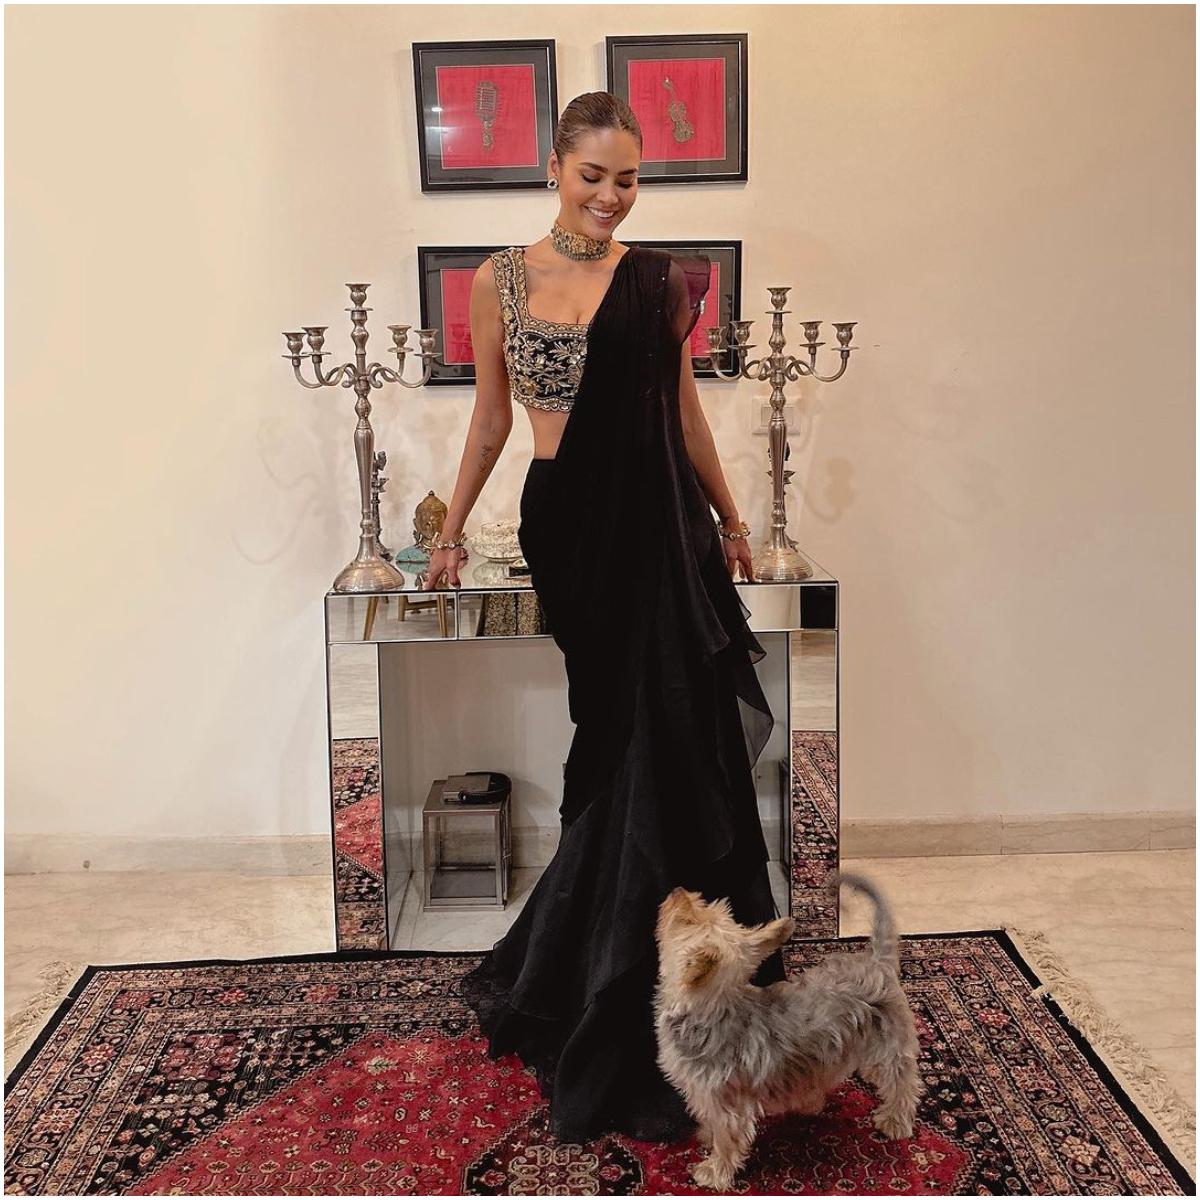 Esha opted for a black fusion outfit for her Diwali look, as she posed with her cute pet at home